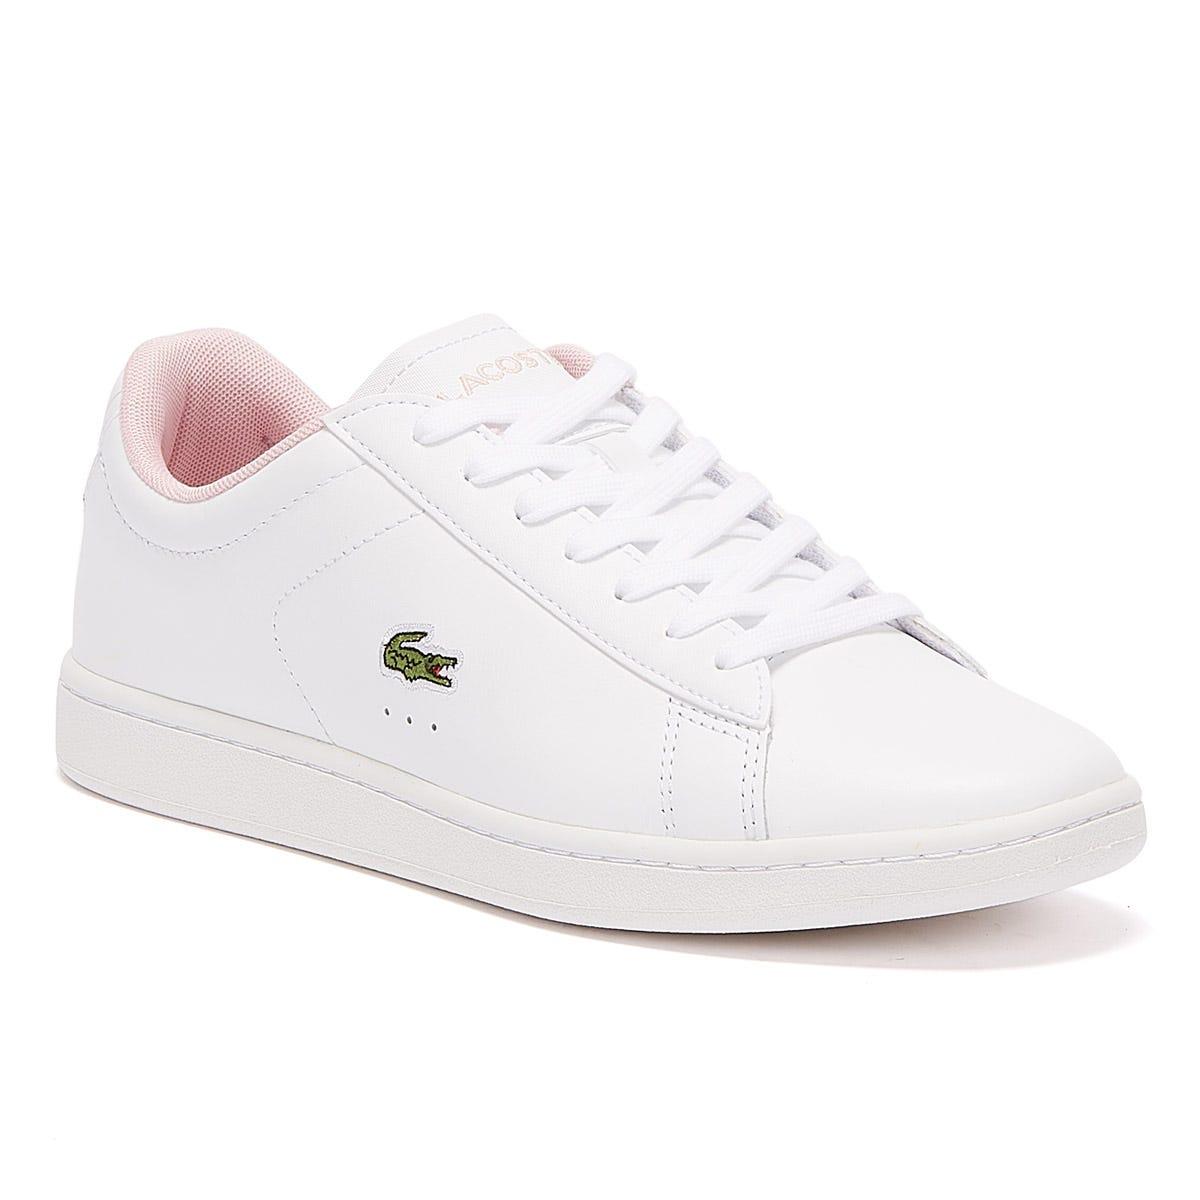 white and pink lacoste trainers, Off 68%, www.scrimaglio.com